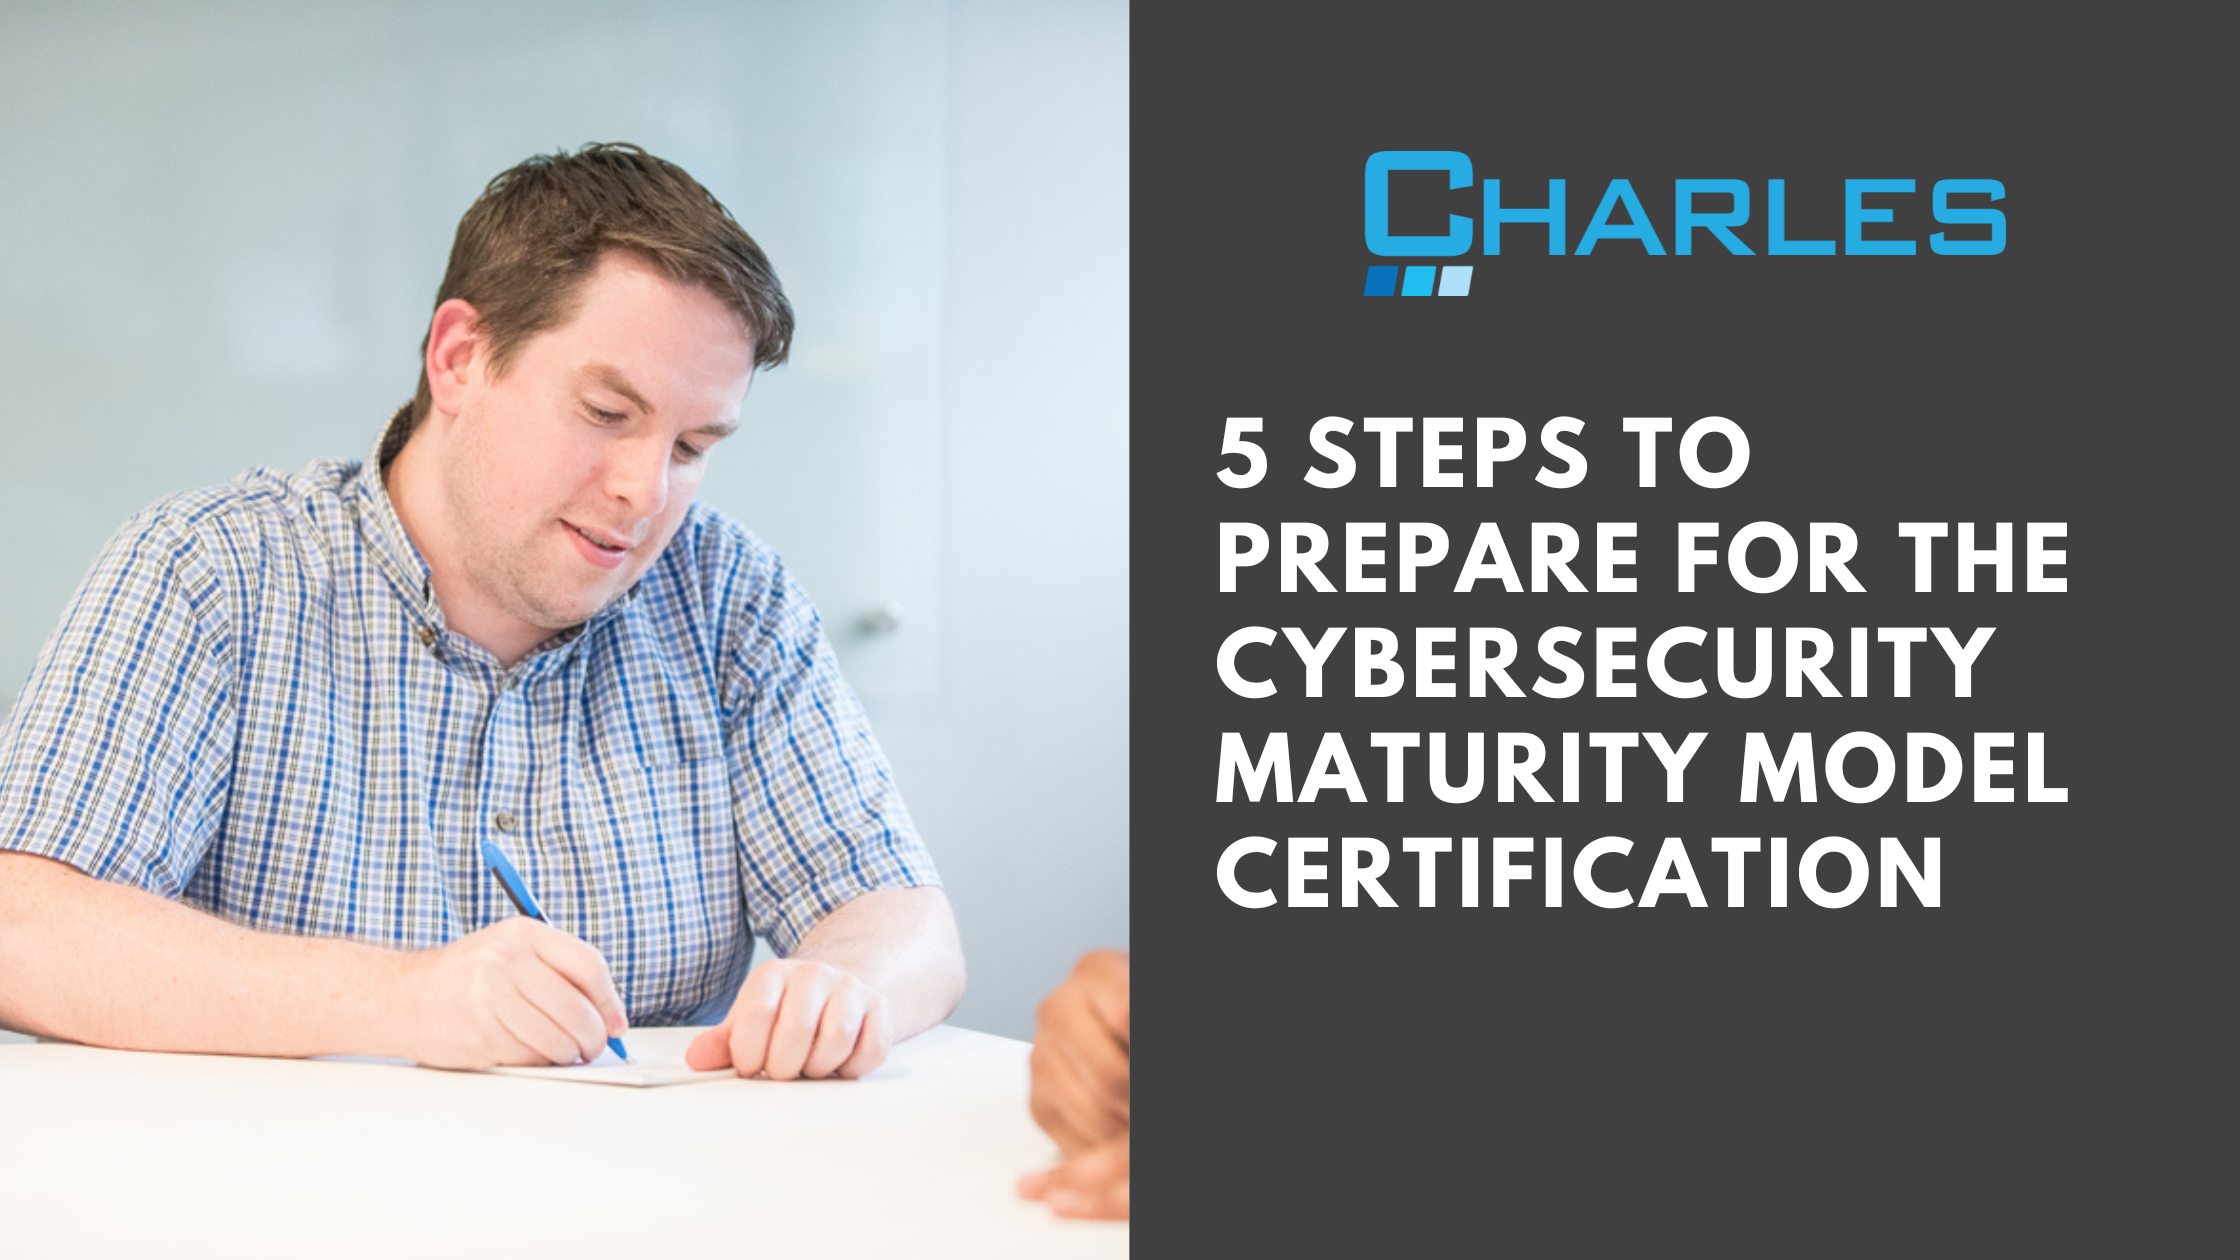 5 Steps to Prepare for the Cybersecurity Maturity Model Certification